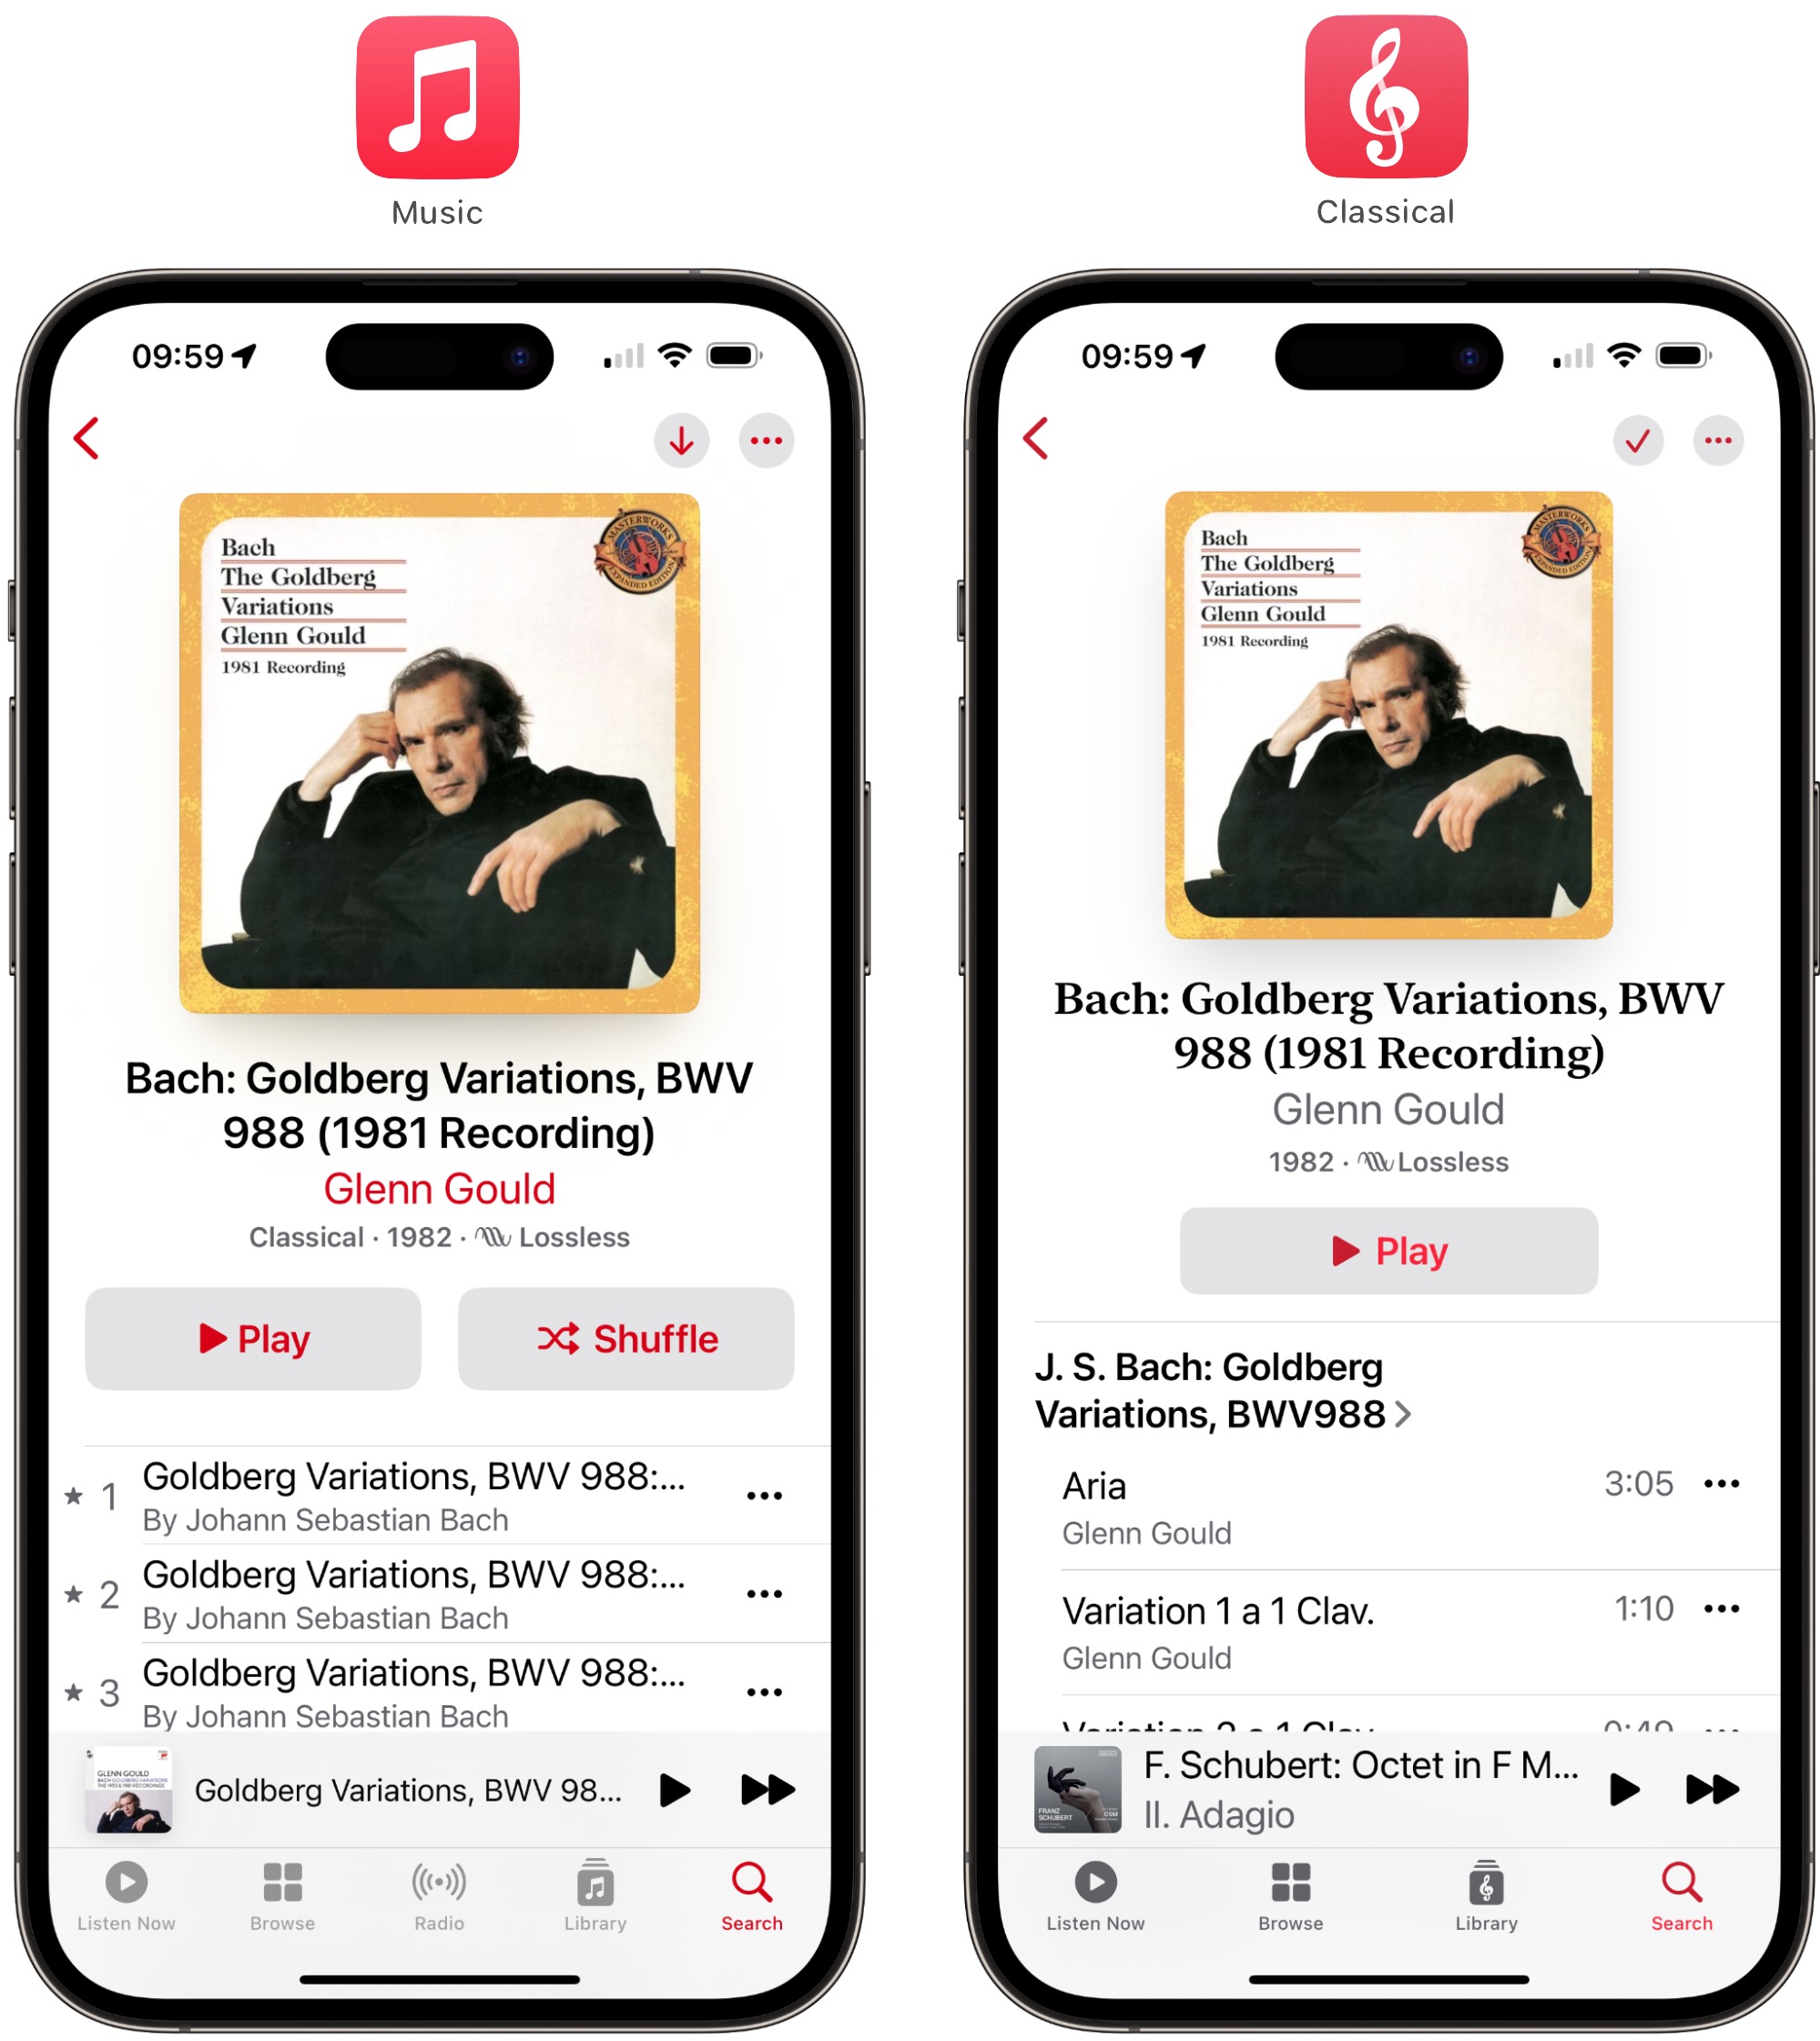 Comparing the Goldberg Variations between Apple Music and Apple Music Classical